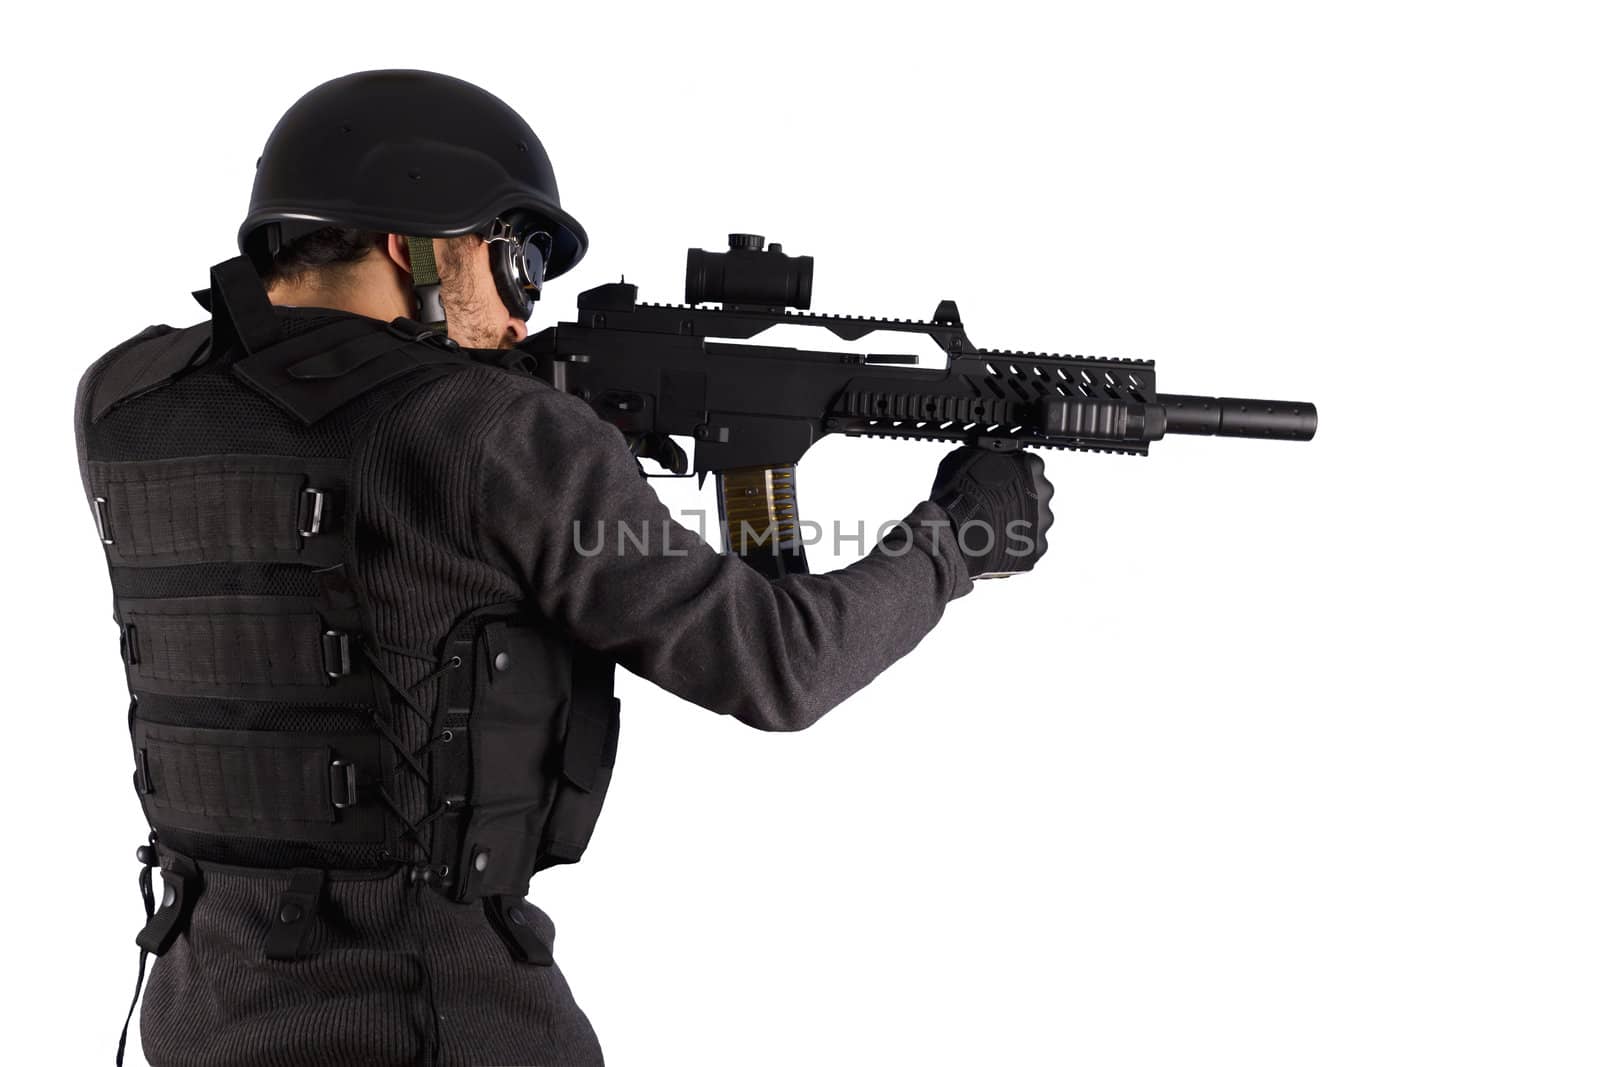 Street Assault, Armed policeman shooting, isolated on white by FernandoCortes